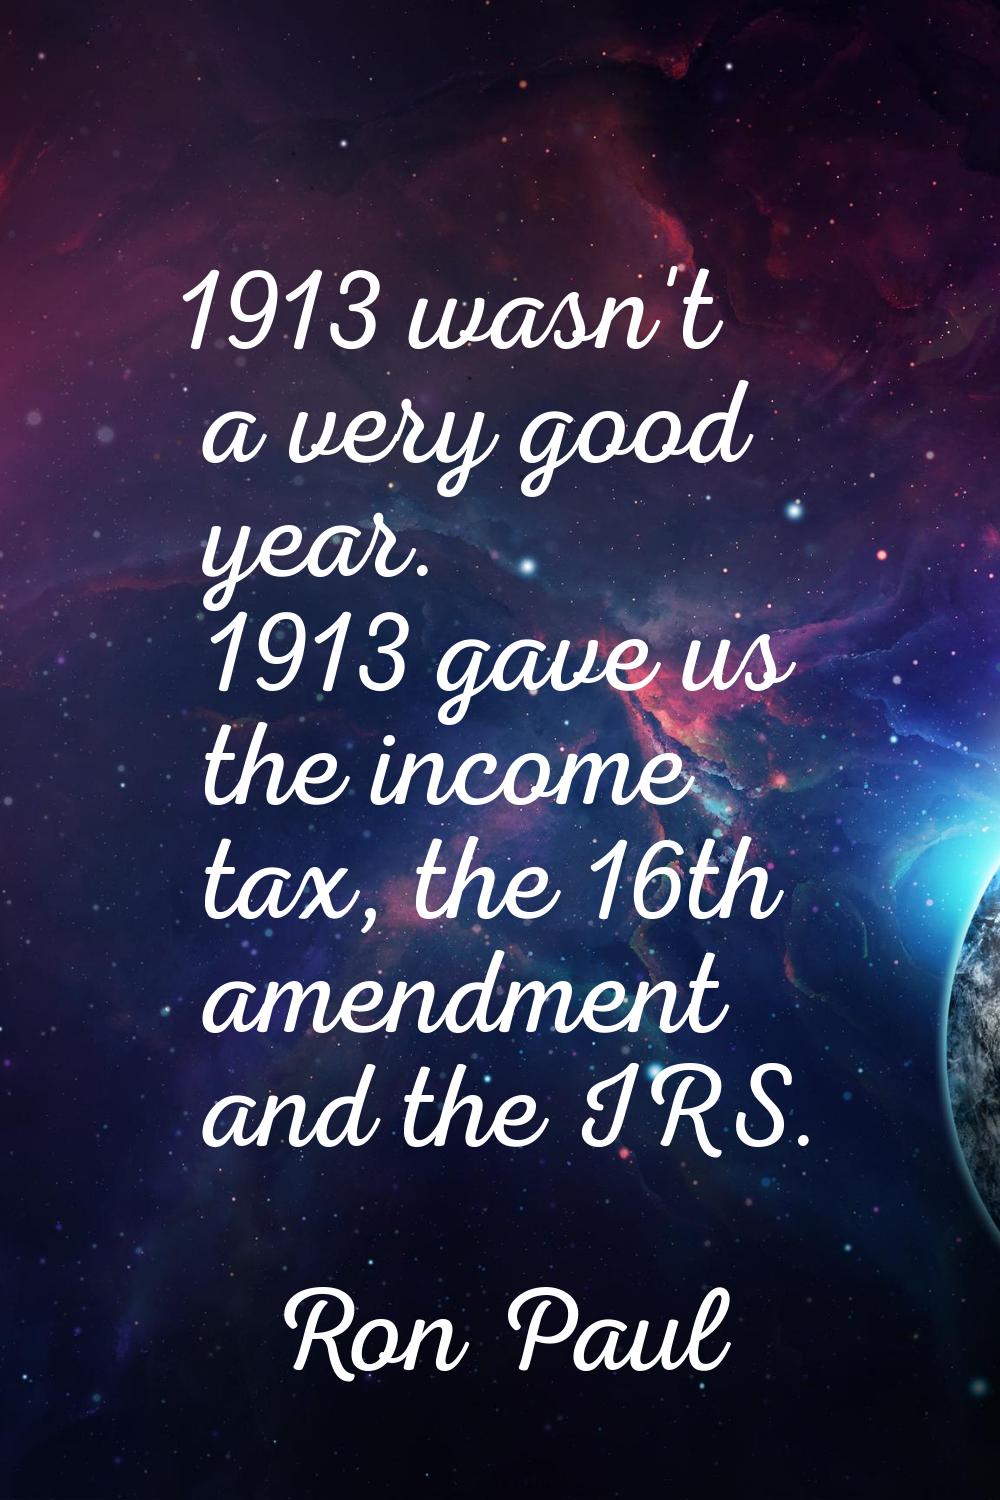 1913 wasn't a very good year. 1913 gave us the income tax, the 16th amendment and the IRS.